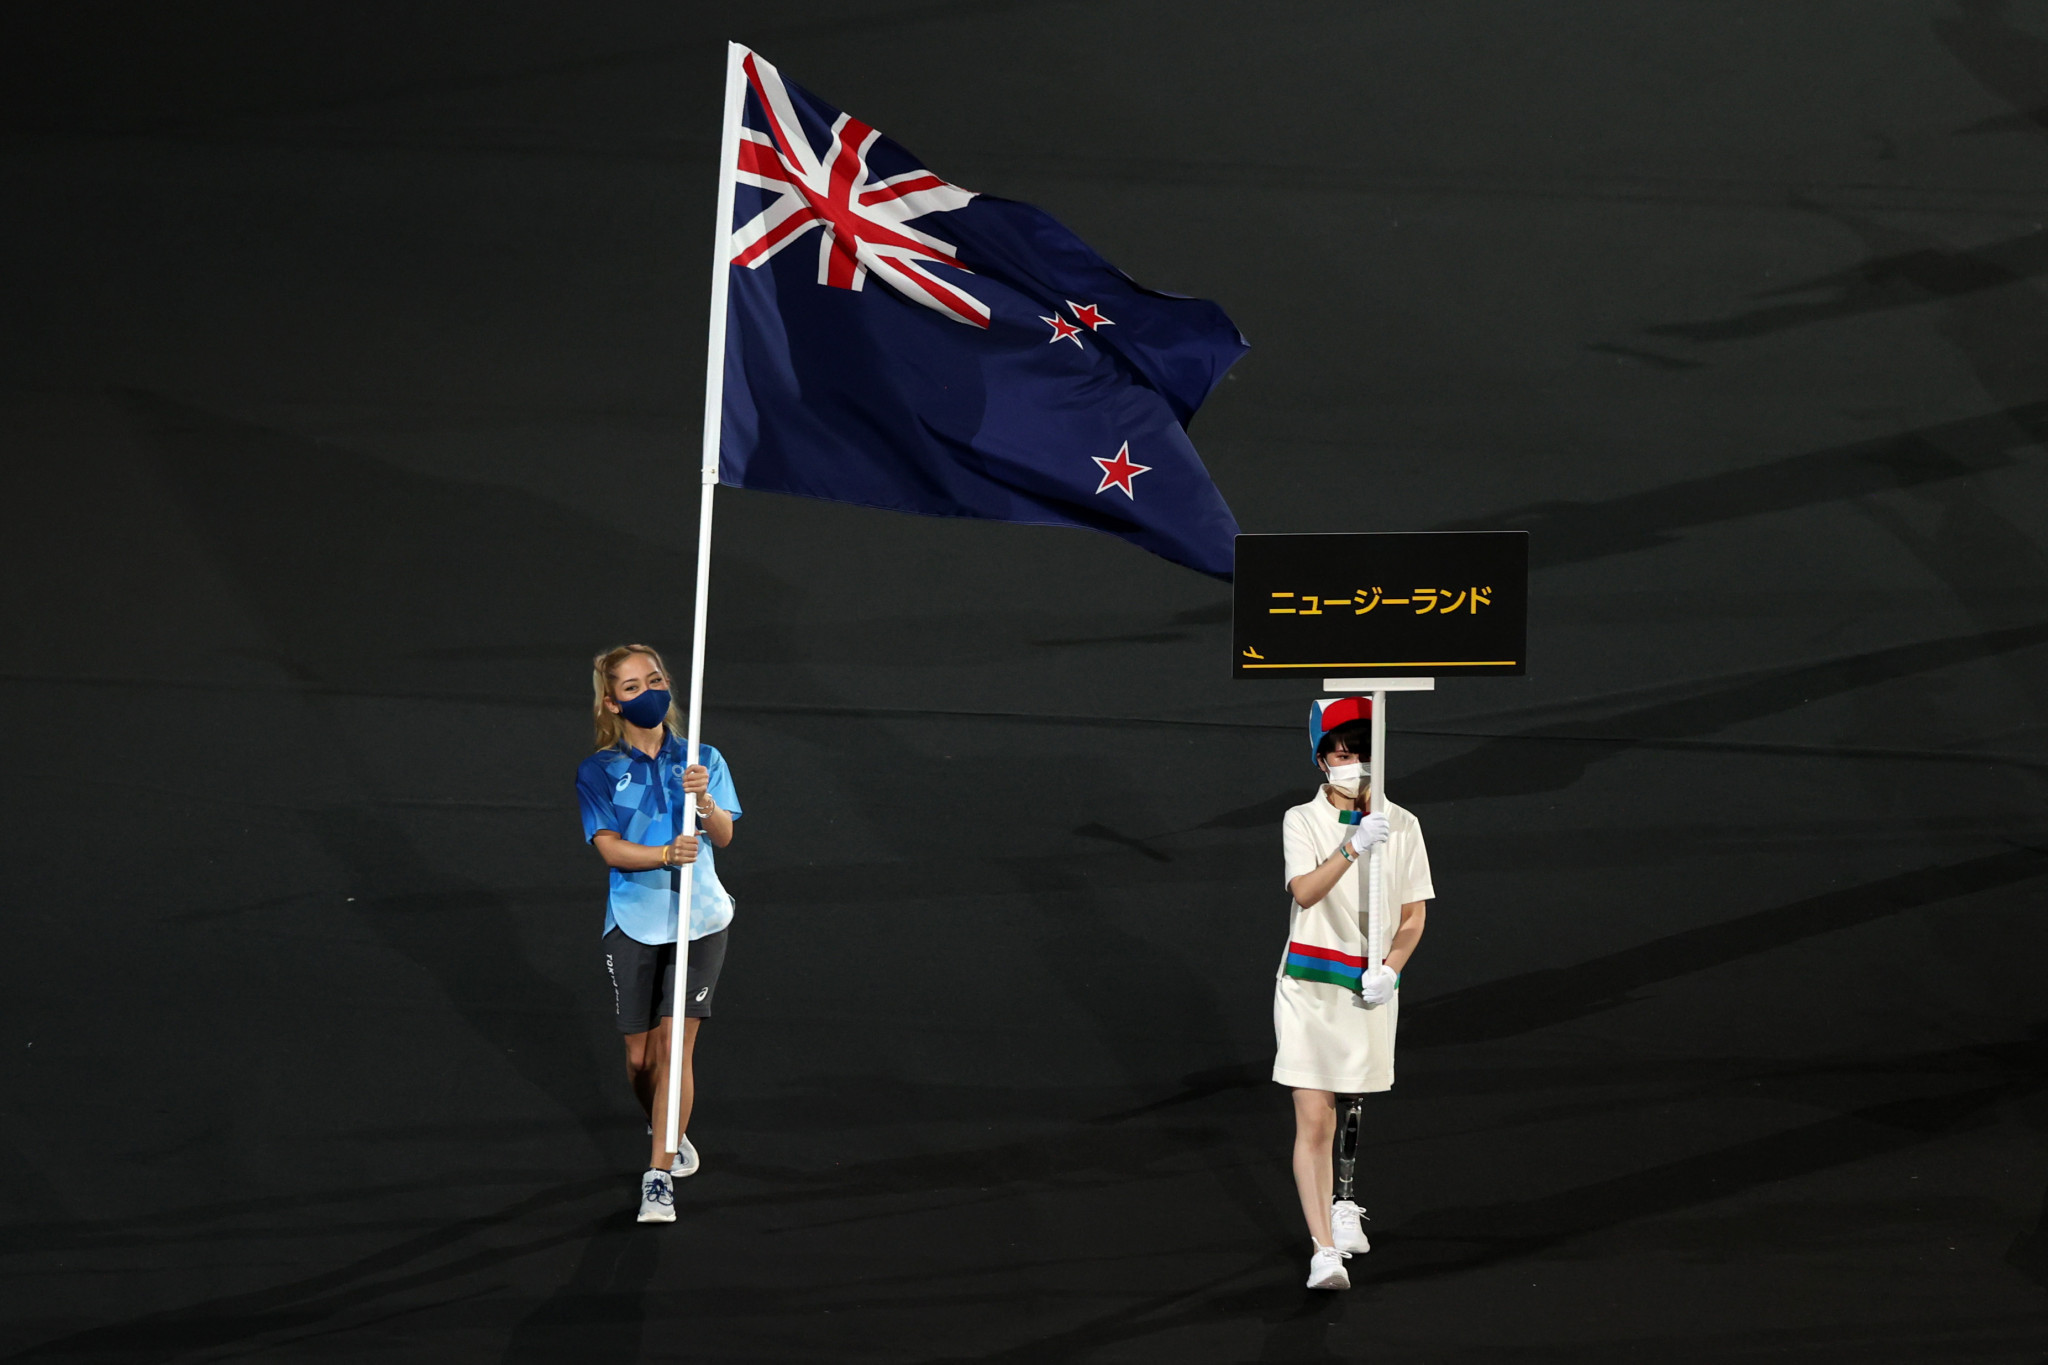 A Tokyo 2020 volunteer carries the flag of New Zealand after the team opted to miss the Opening Ceremony over COVID-19 concerns ©Getty Images